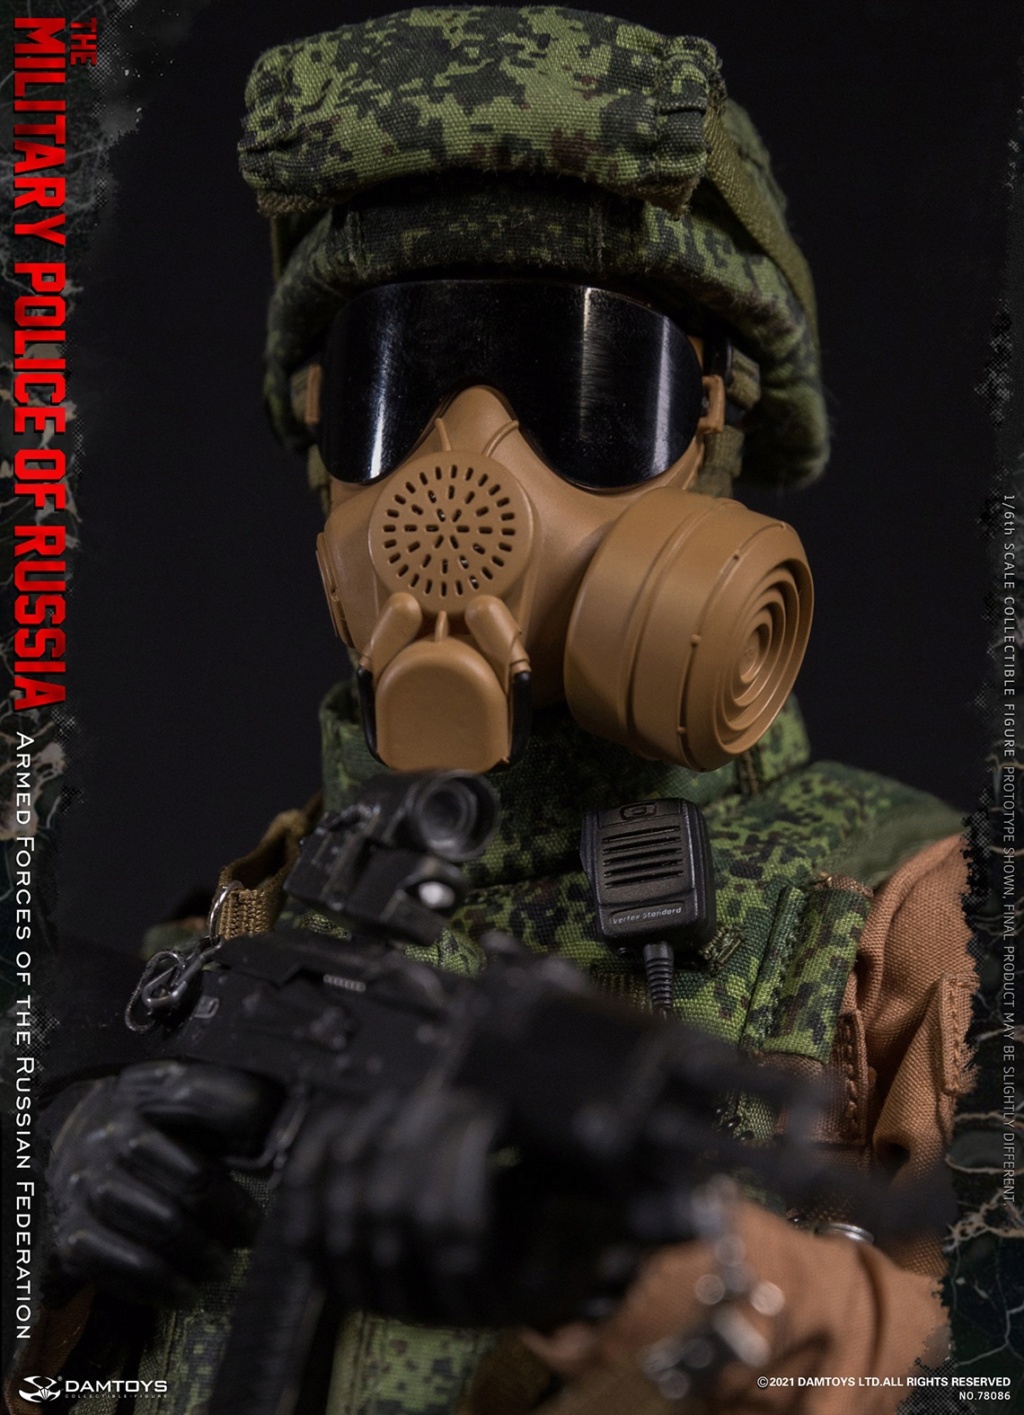 ModernMilitary - NEW PRODUCT: DAMTOYS: 1/6 Russian Federation Armed Forces-Gendarmerie #78086 15043711